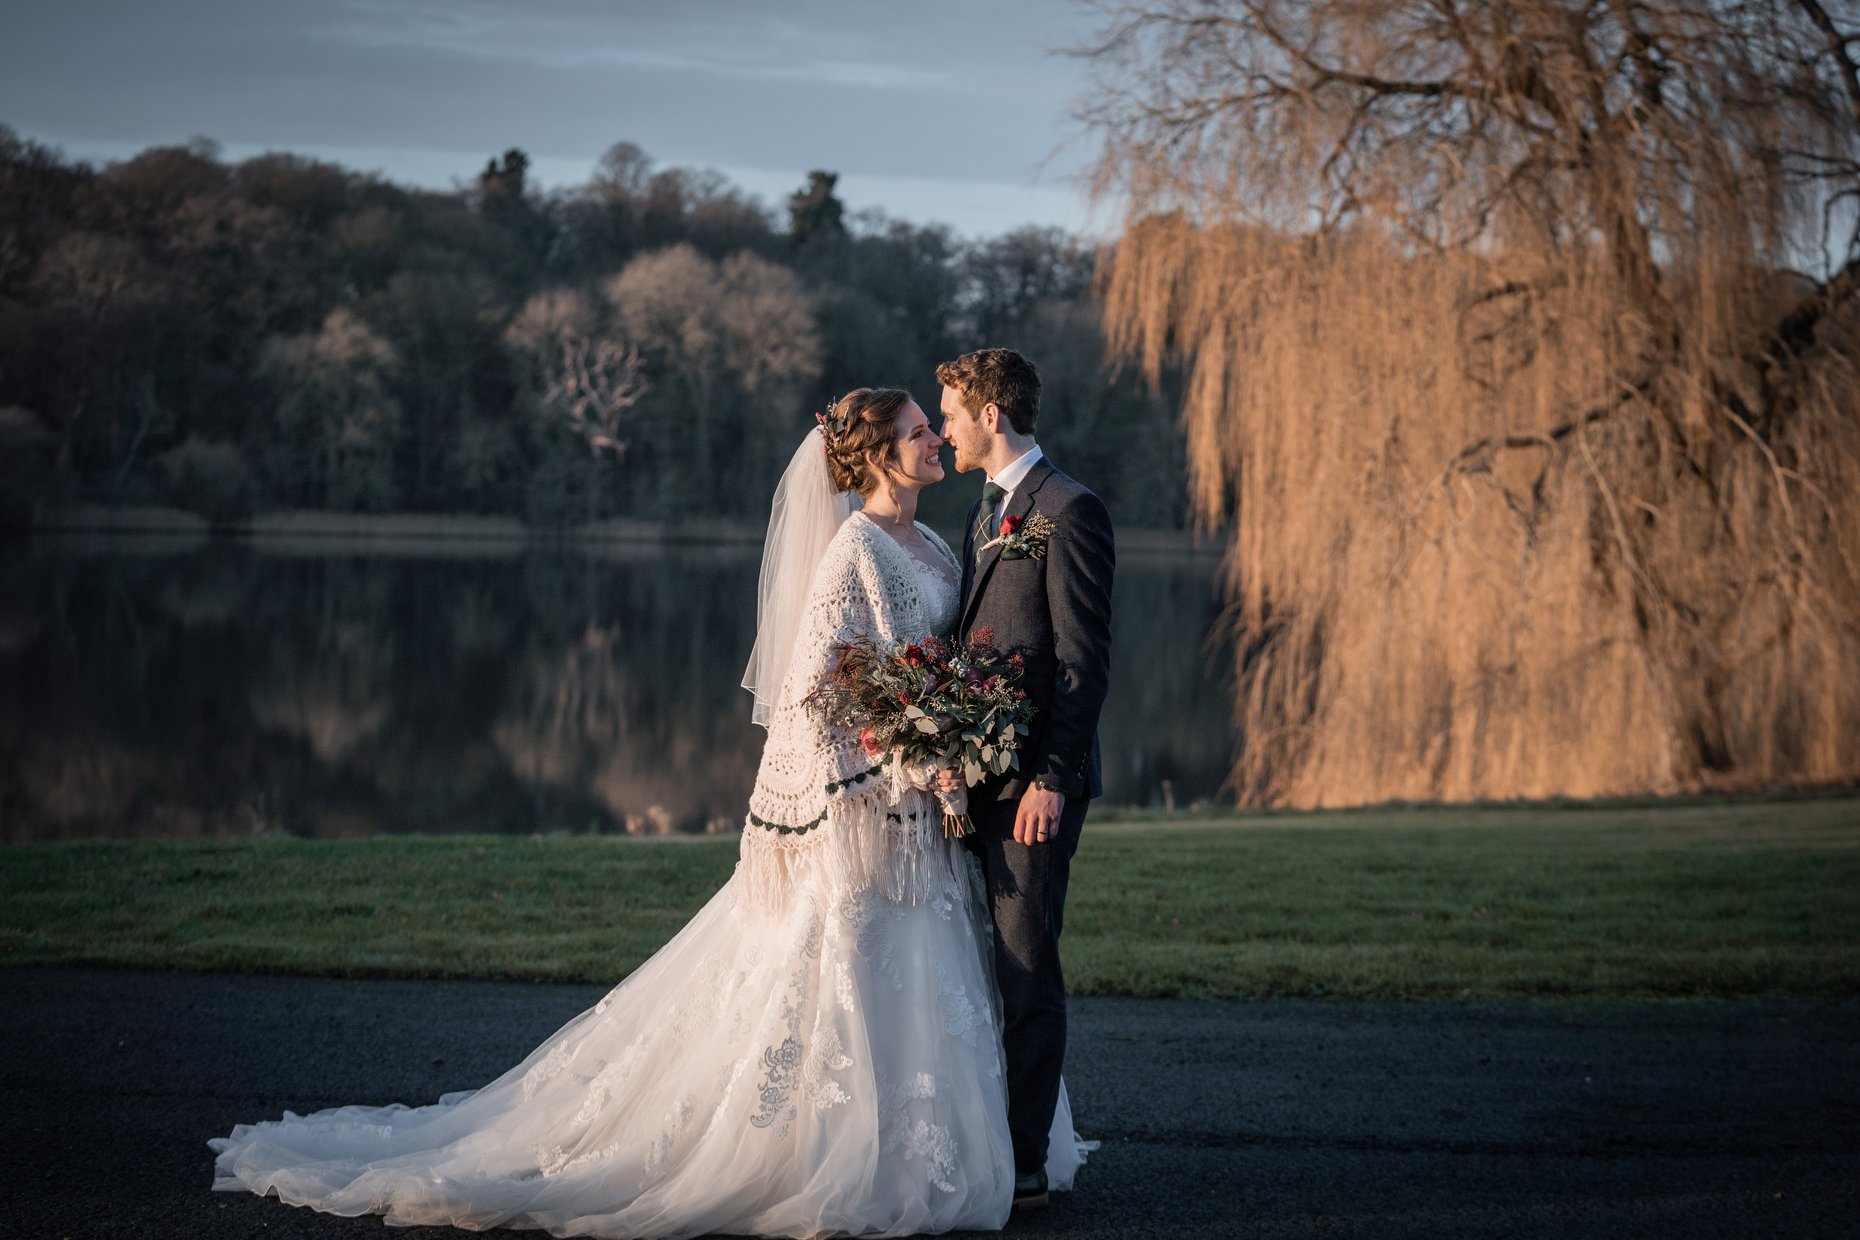 Outdoor winter weddings at Combermere Abbey